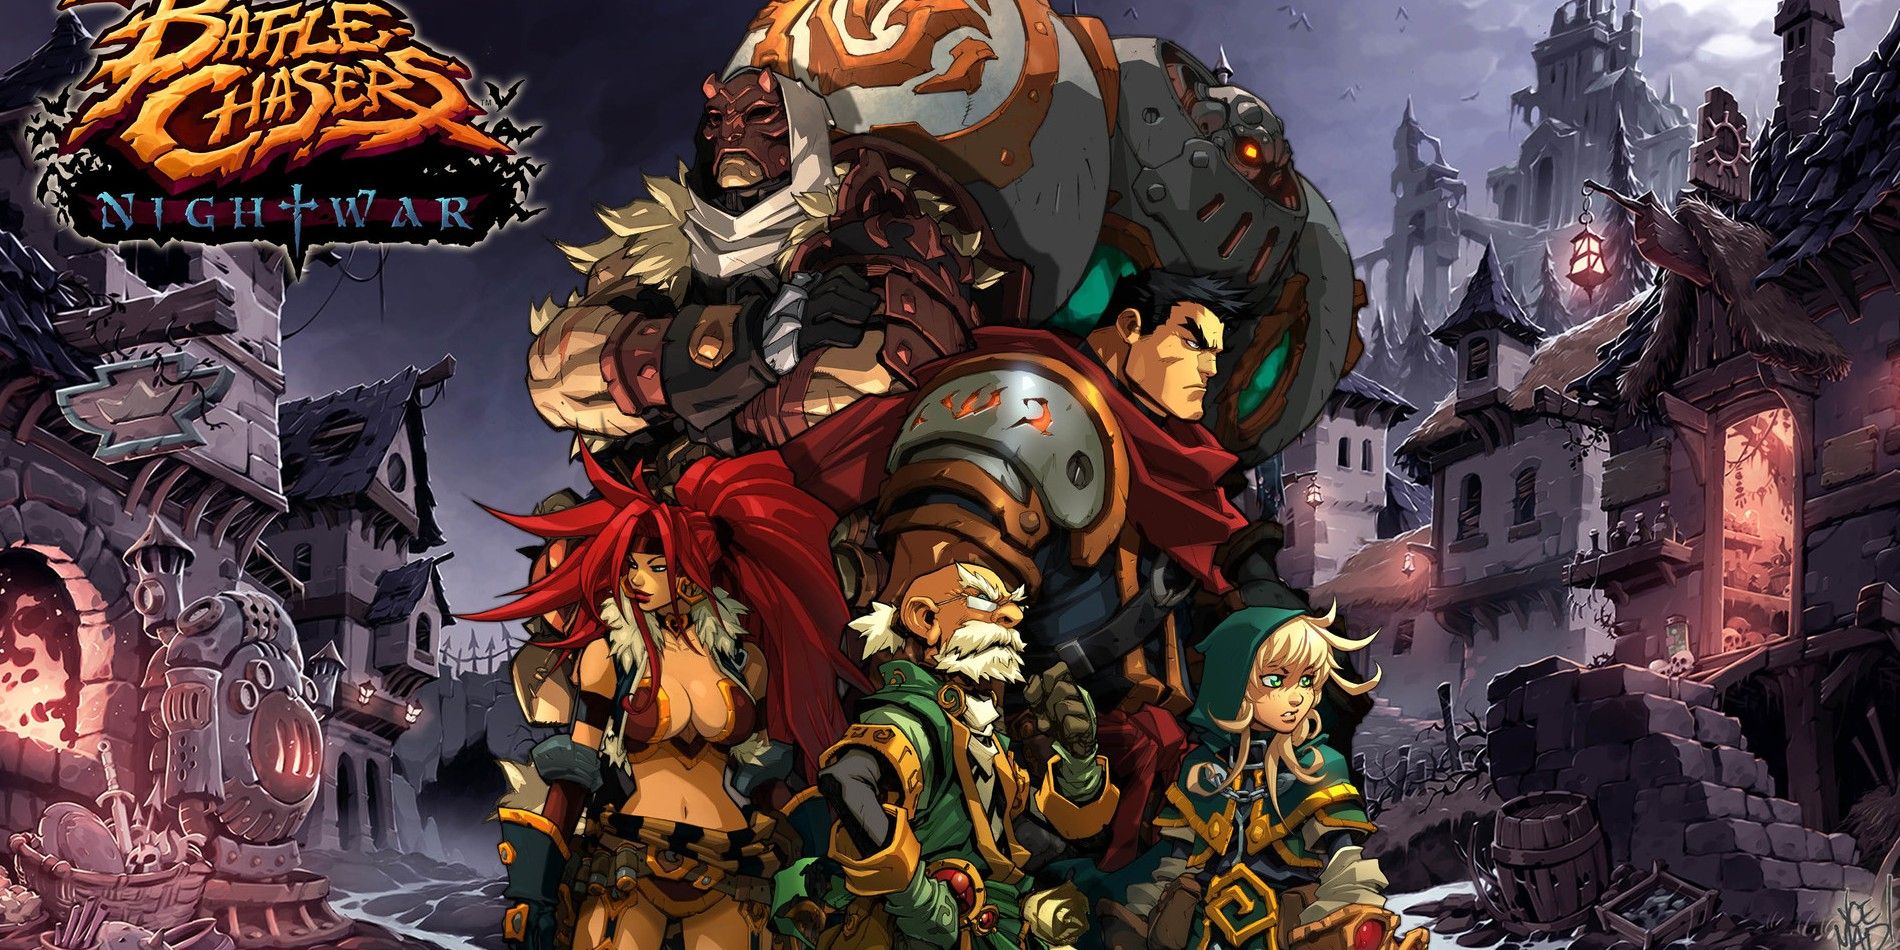 The party at the title of Battle Chasers Nightwar